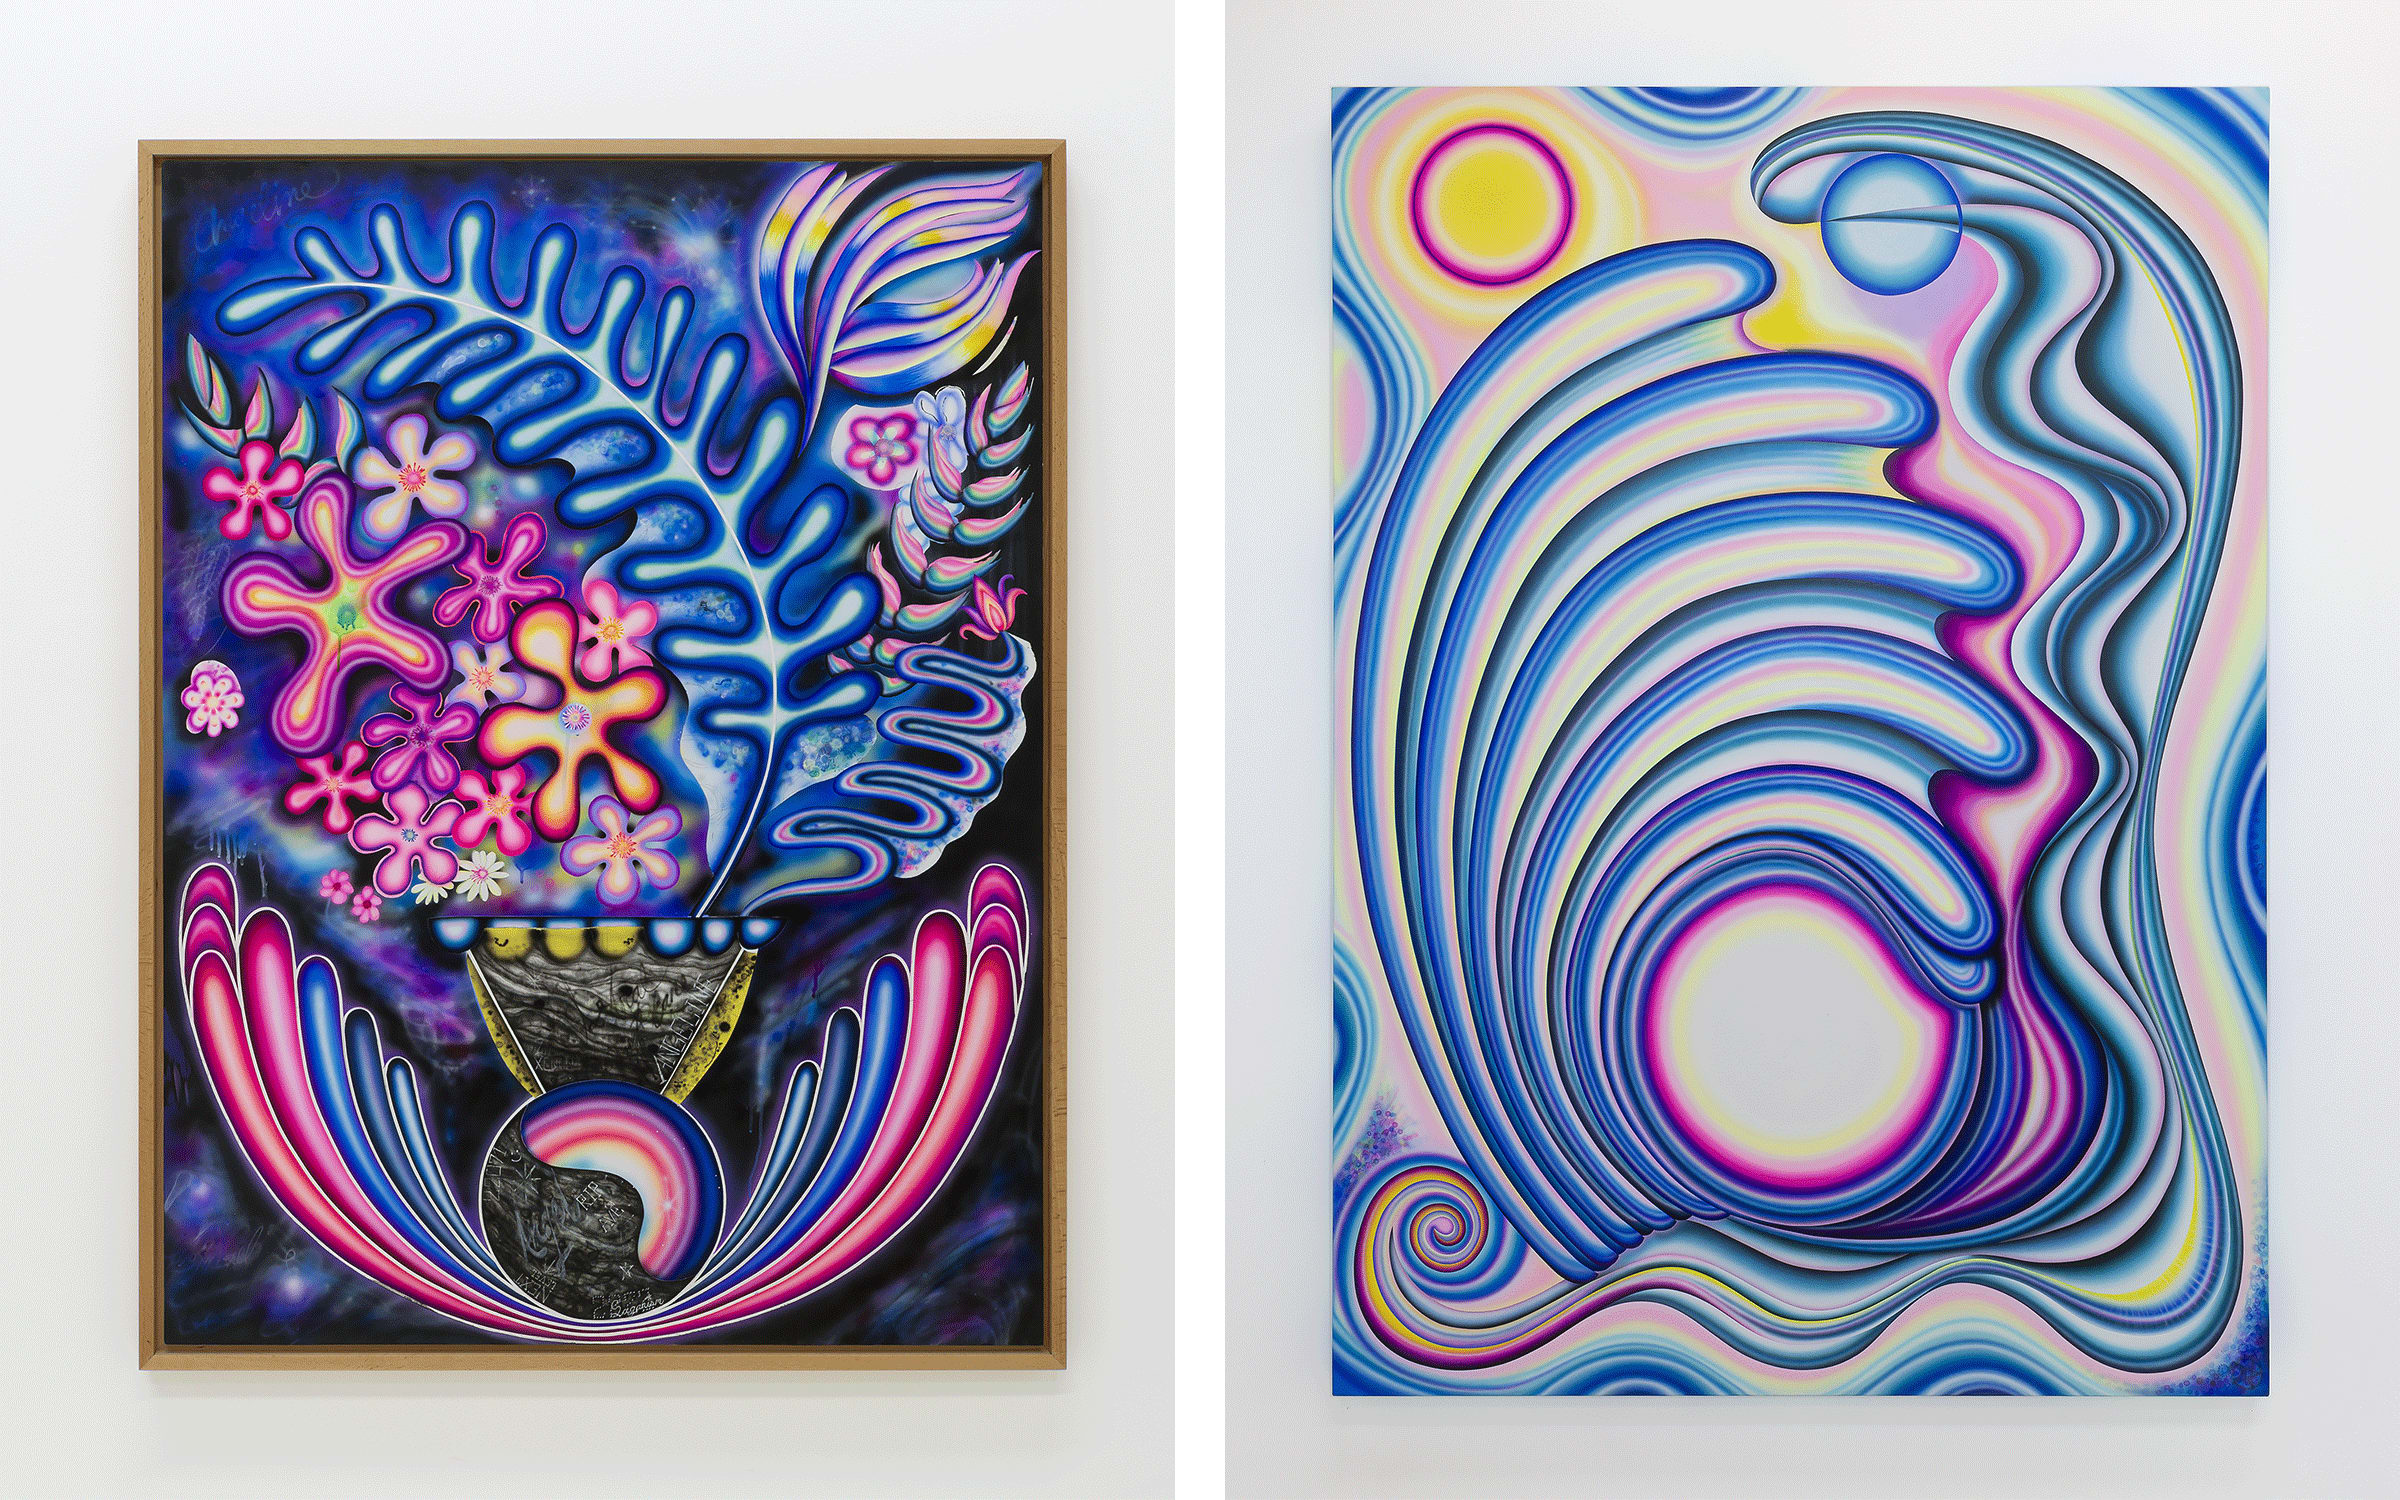 Artworks by Angeline Rivas. Courtesy of the artist and Chris Sharp. Left: Hologram Rose, 2023. Right: Cosmosis.com, 2023.